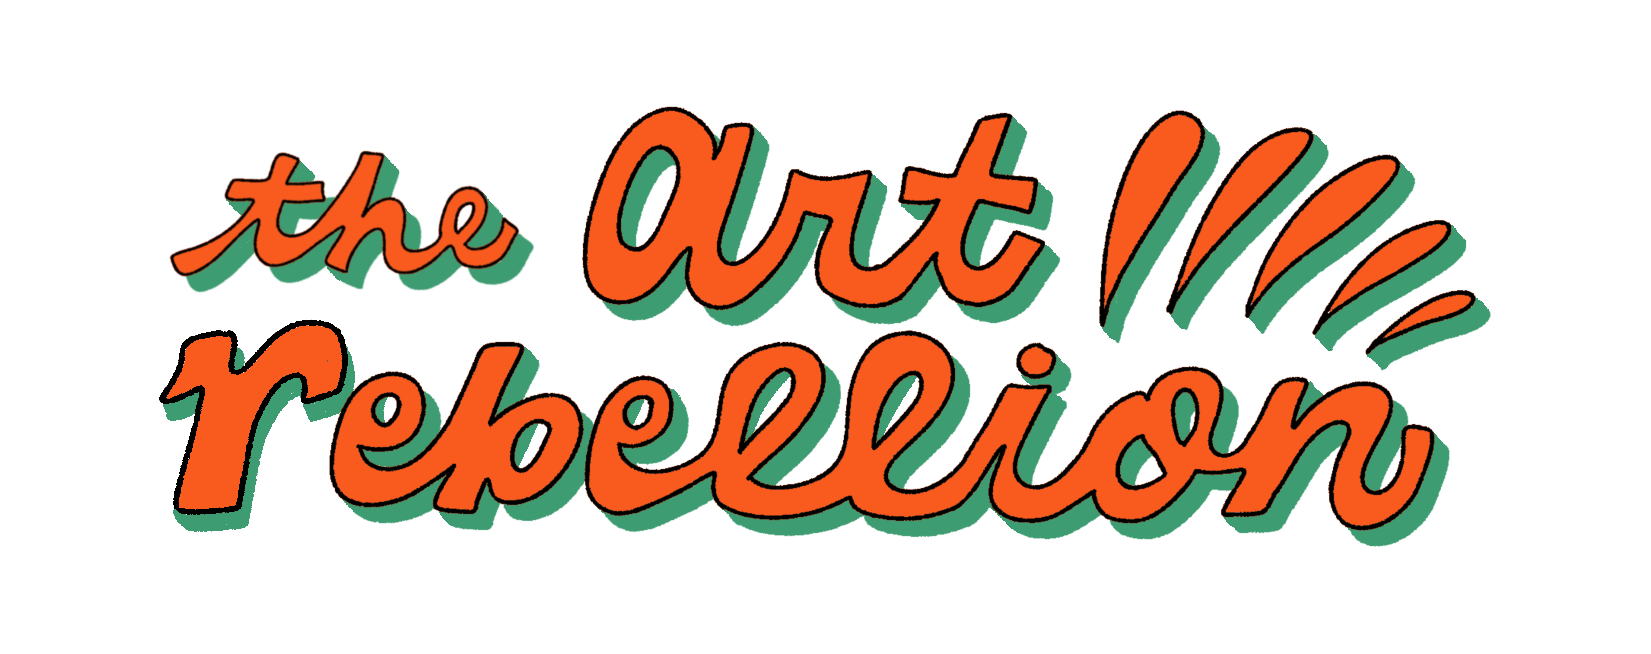 the-art-rebellion-written-in-cursive-in-red-and-green